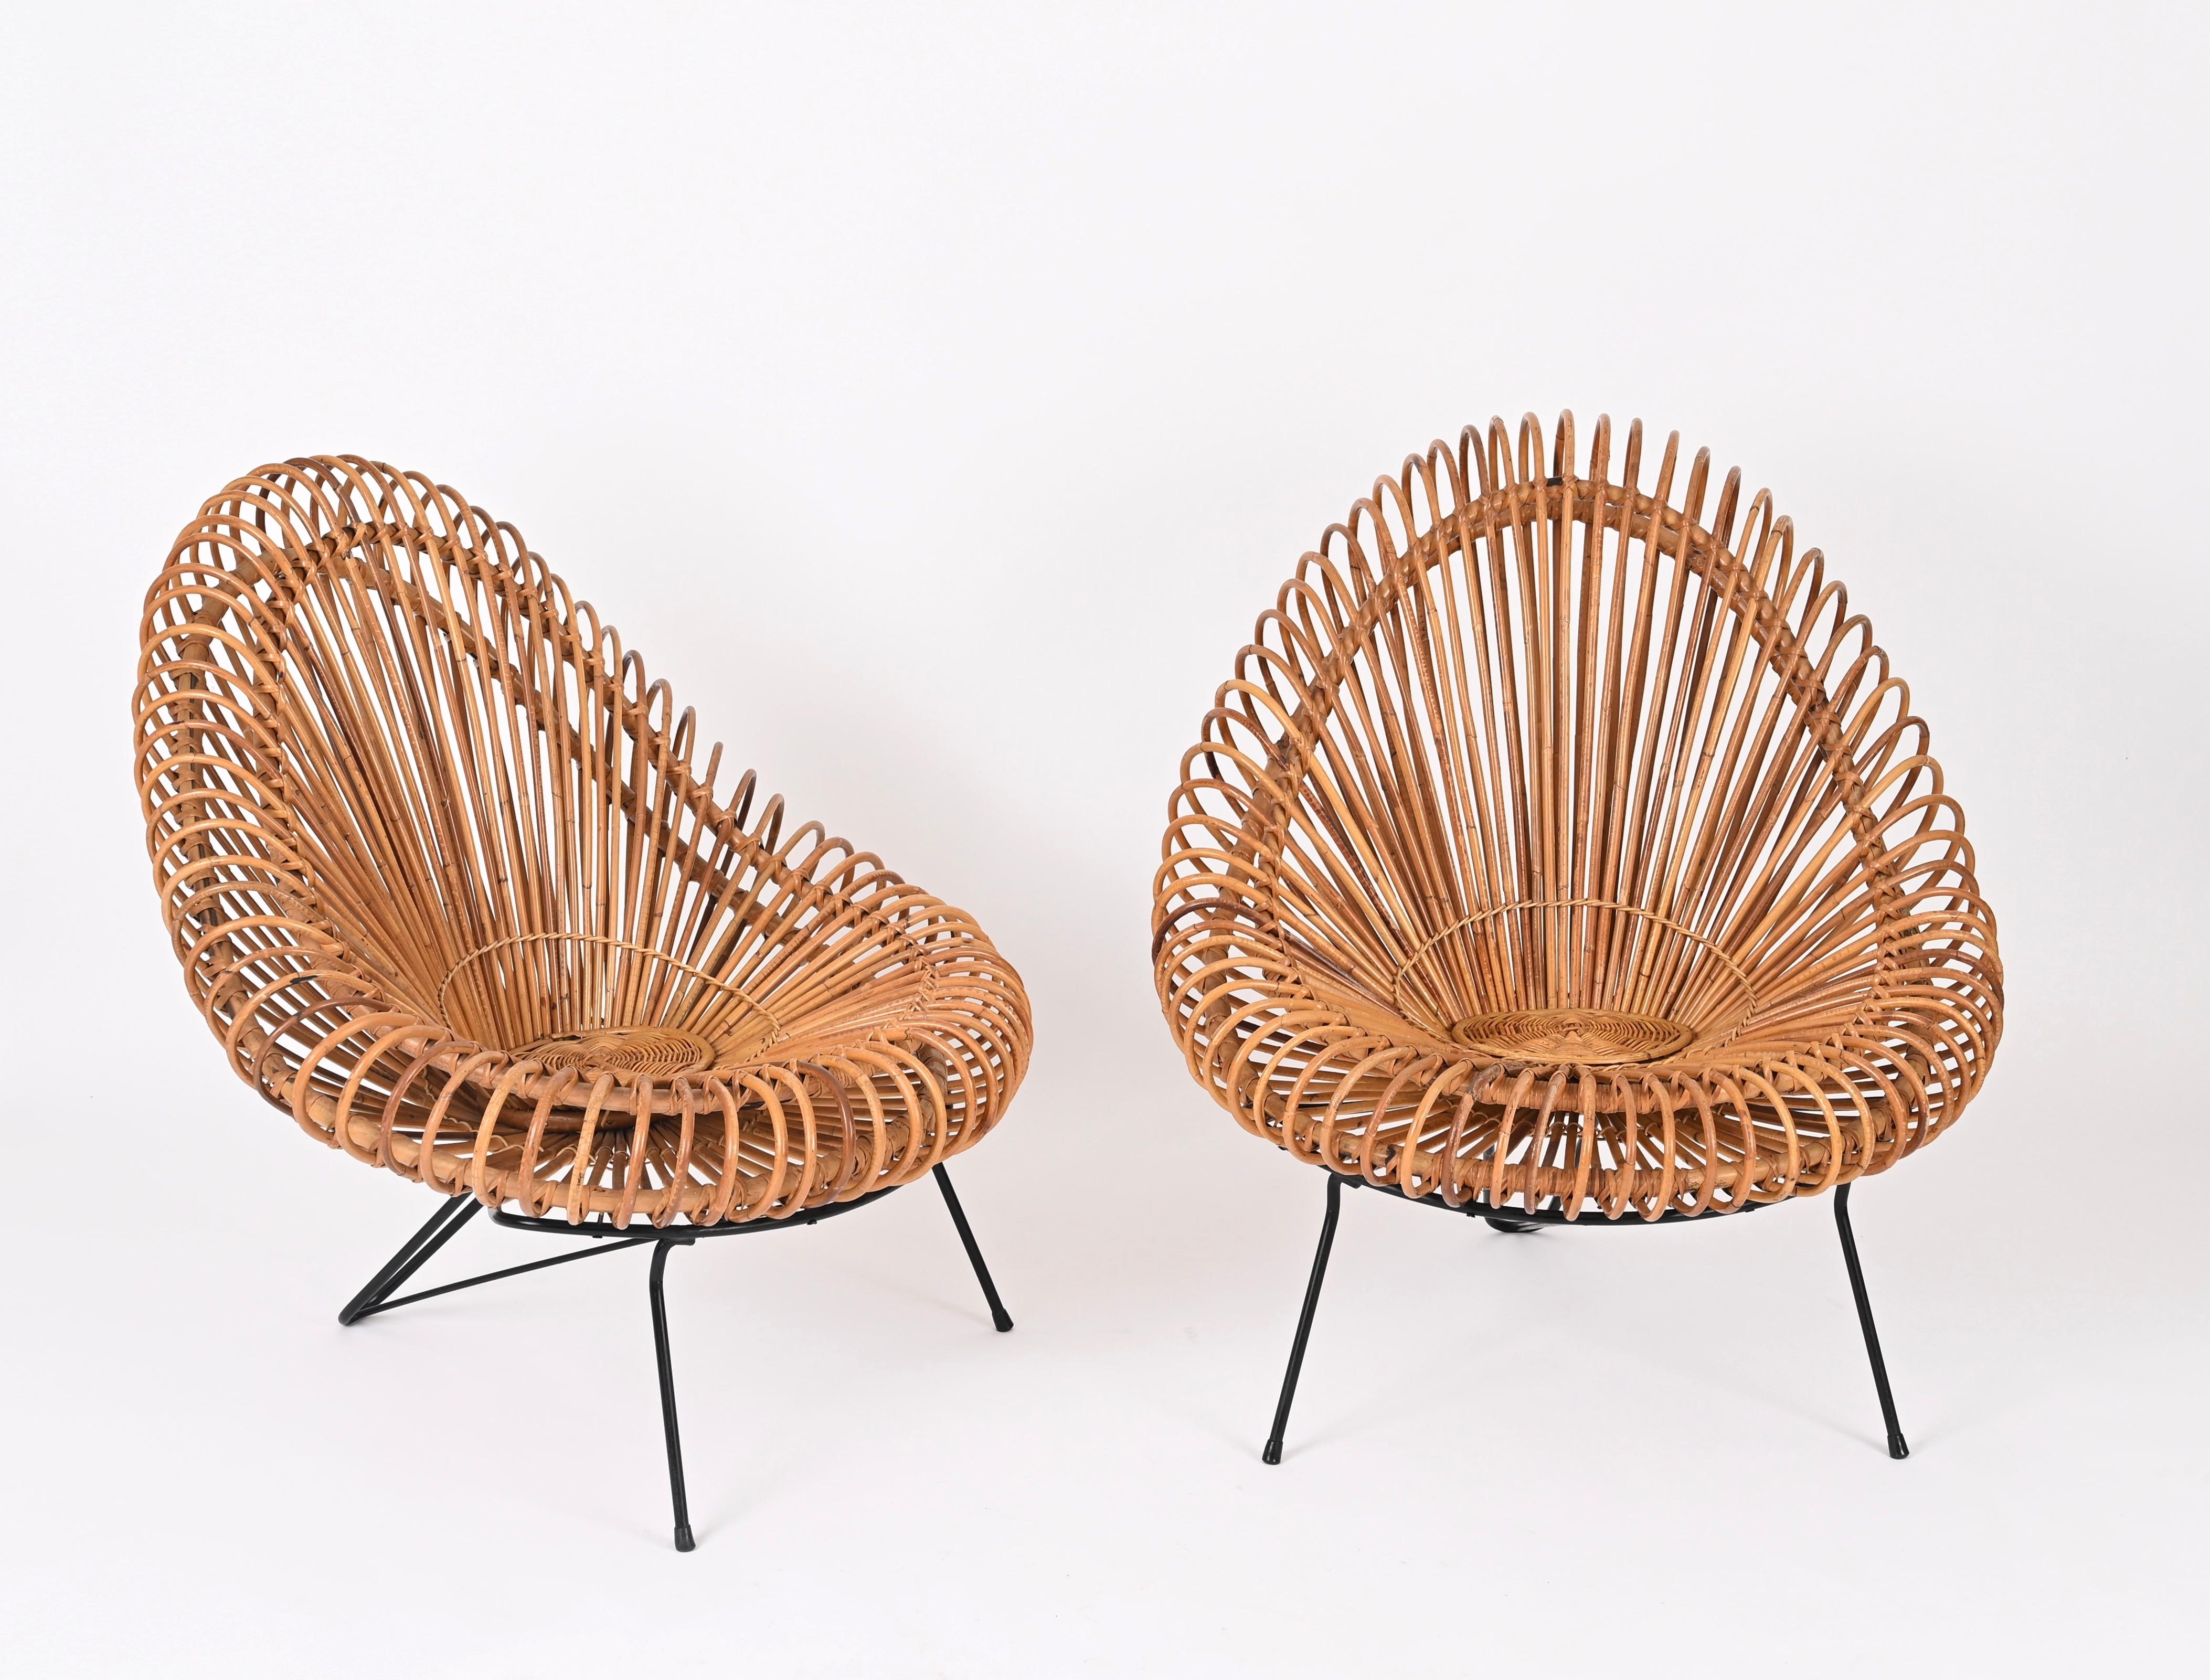 Living Room Rattan Set by Janine Abraham & Dirk Jan Rol - Chairs, Pouf, Mirror  For Sale 10